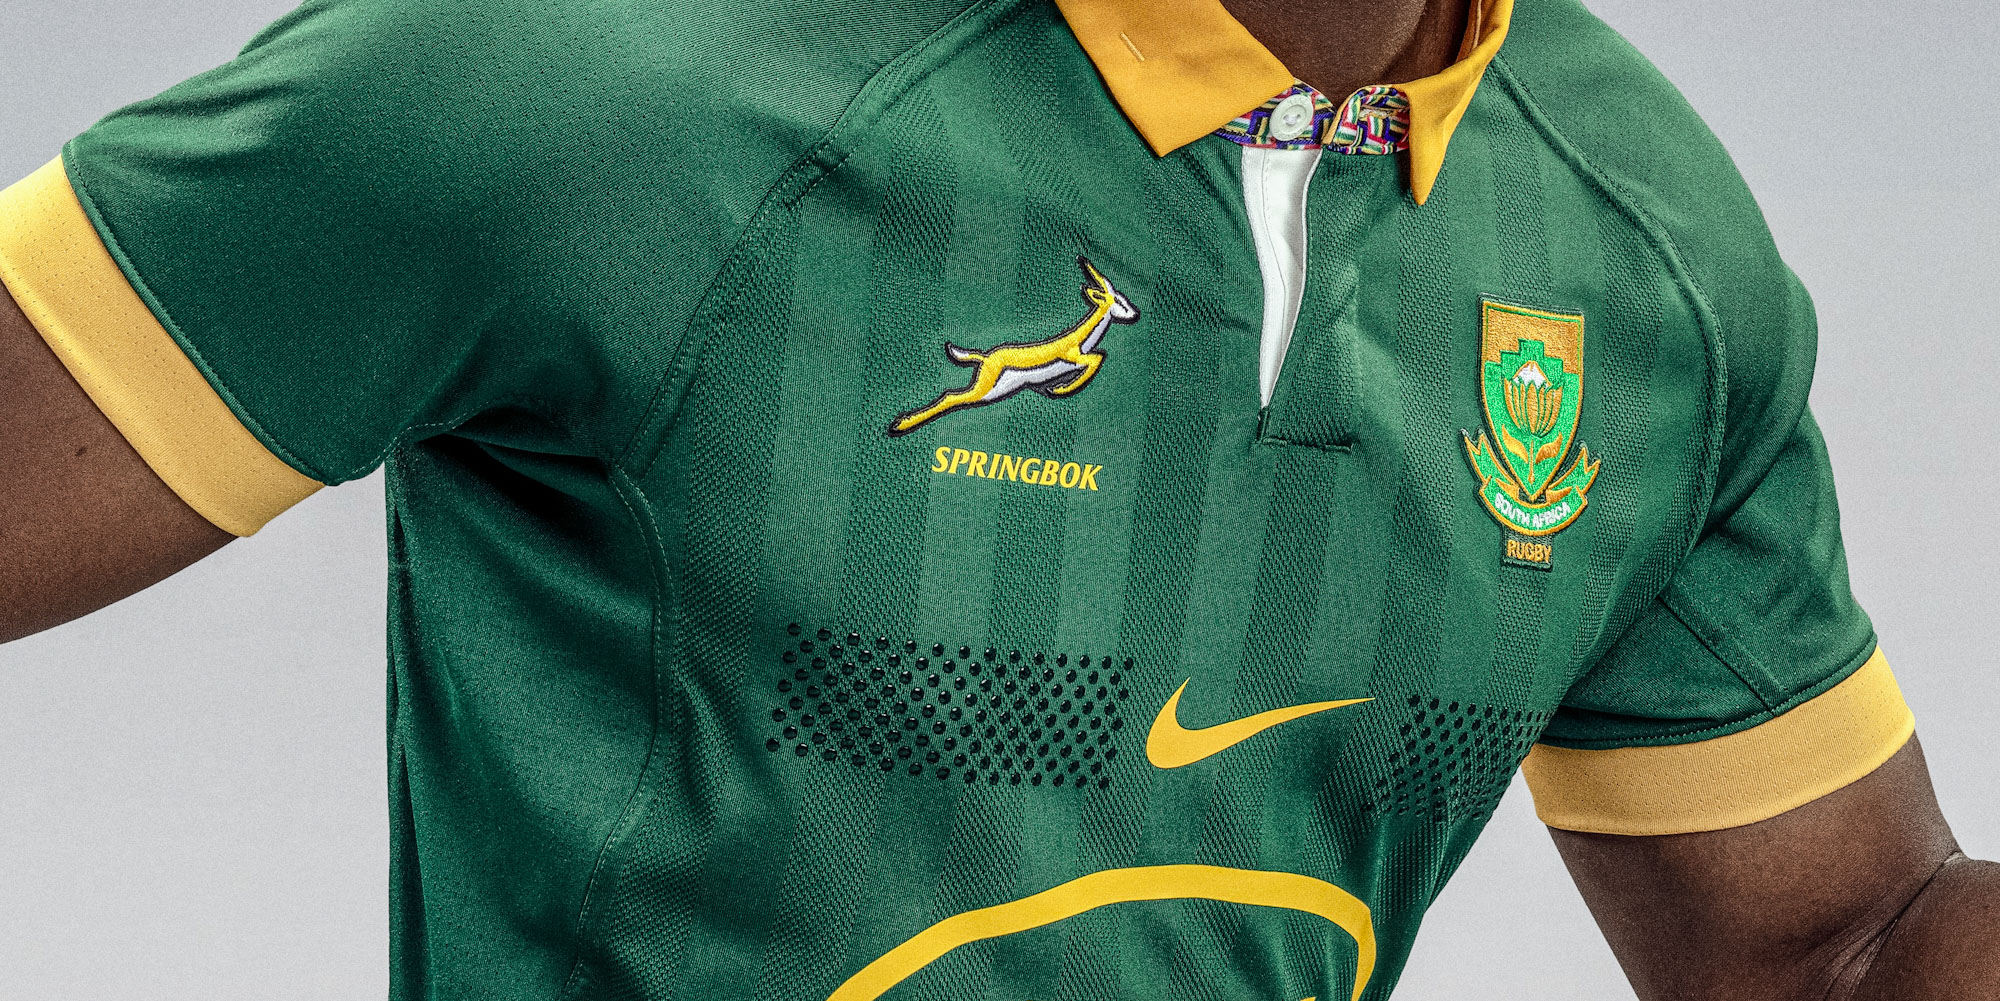 Springboks jersey for Lions 2021 series released - Rugby World